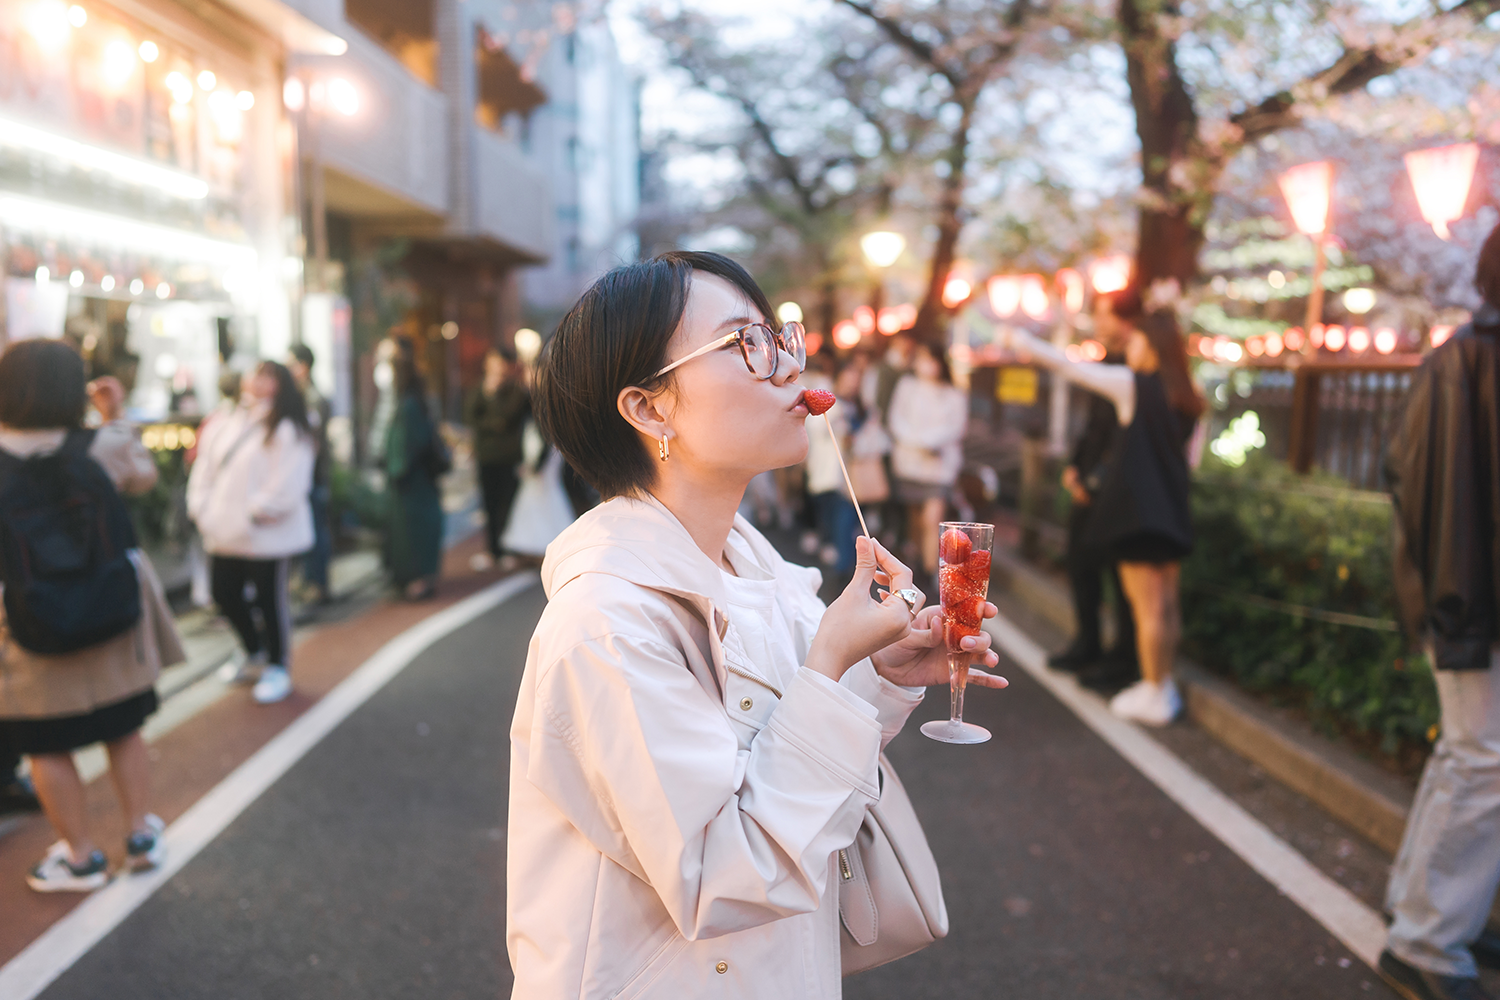 A woman enjoys a famous sakura champagne drink at a cherry blossom festival in Tokyo.